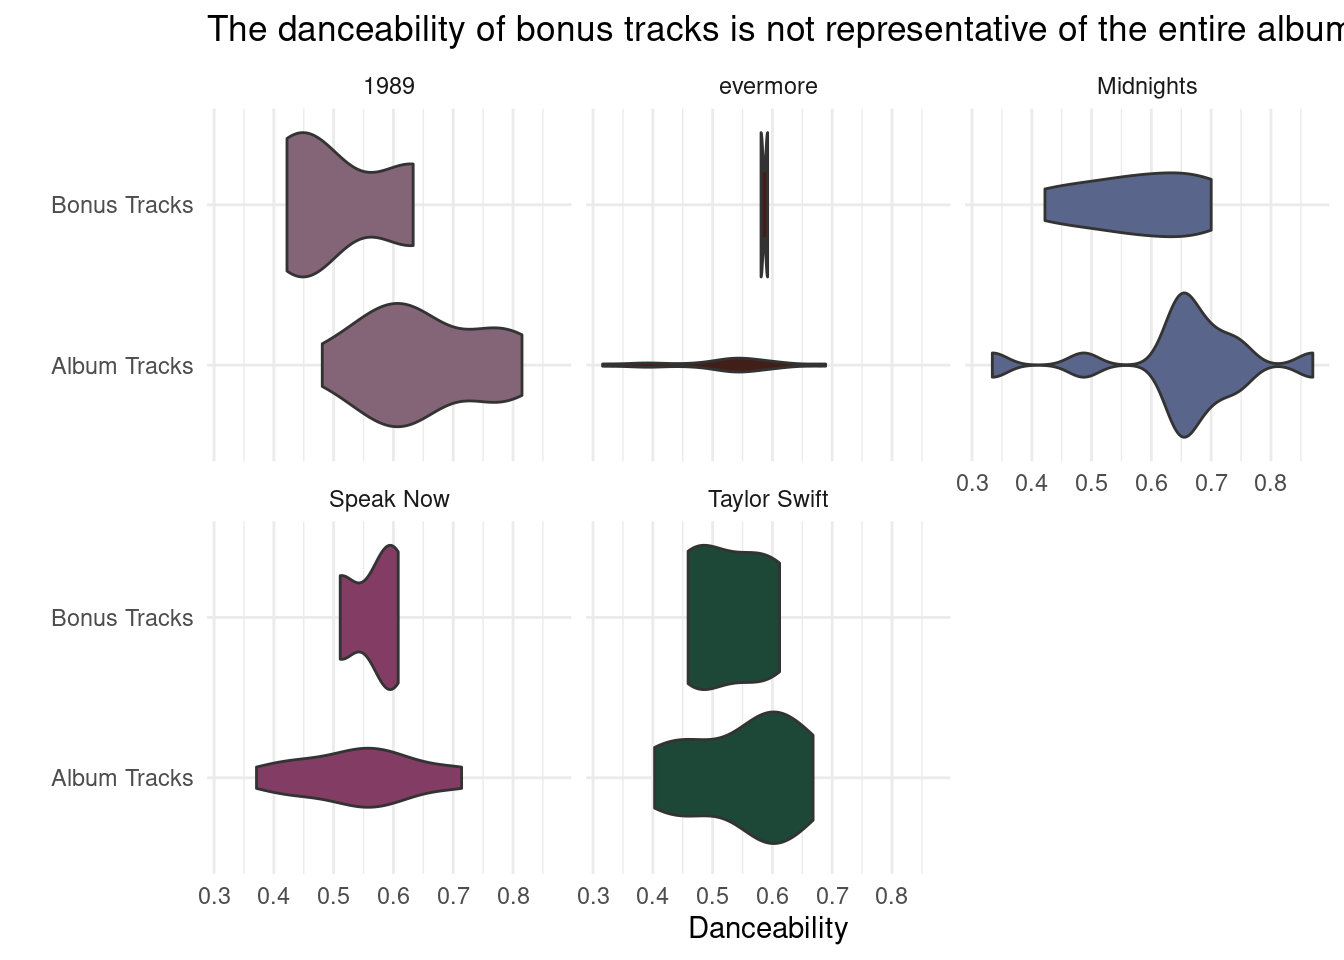 The plot is titled The danceability of bonus tracks is not representative of the entire album. It is a violin plot with five facets- one for each Taylor Swift album with bonus tracks. Each facet shows the danceability distribution of bonus tracks and album track, and distributions are significantly different between the two types.